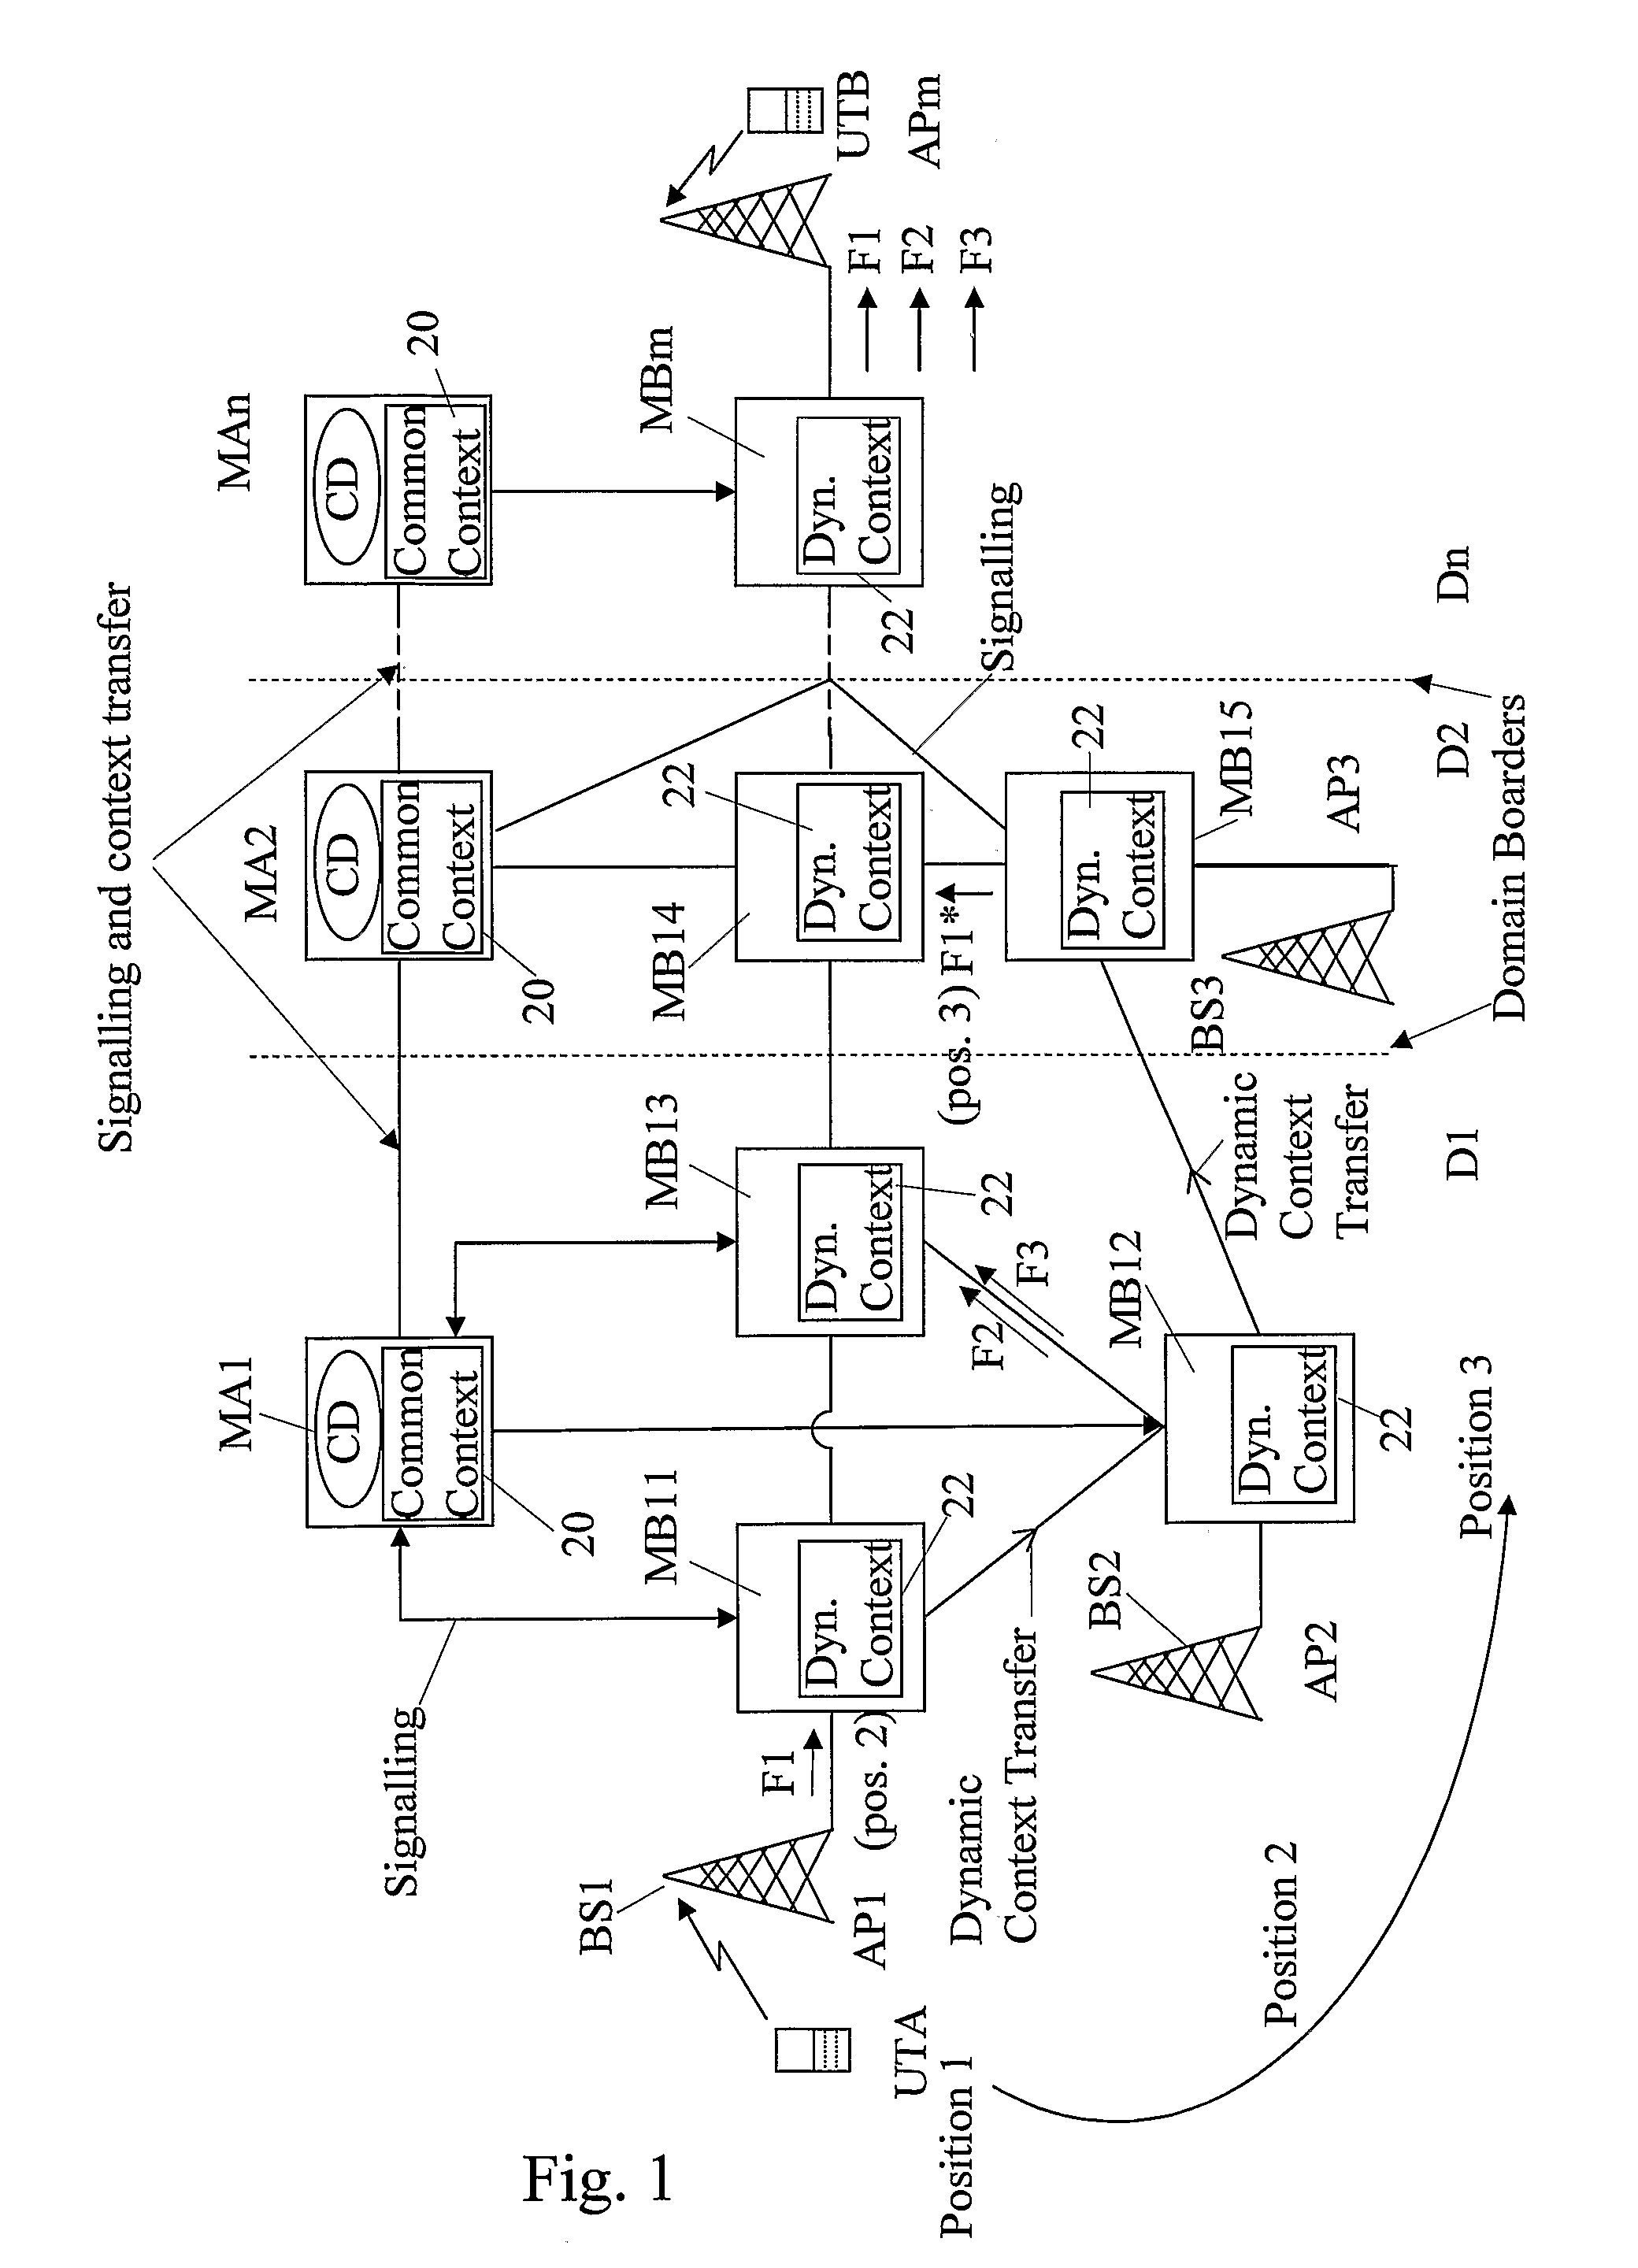 Method and system for handling context of data packet flows